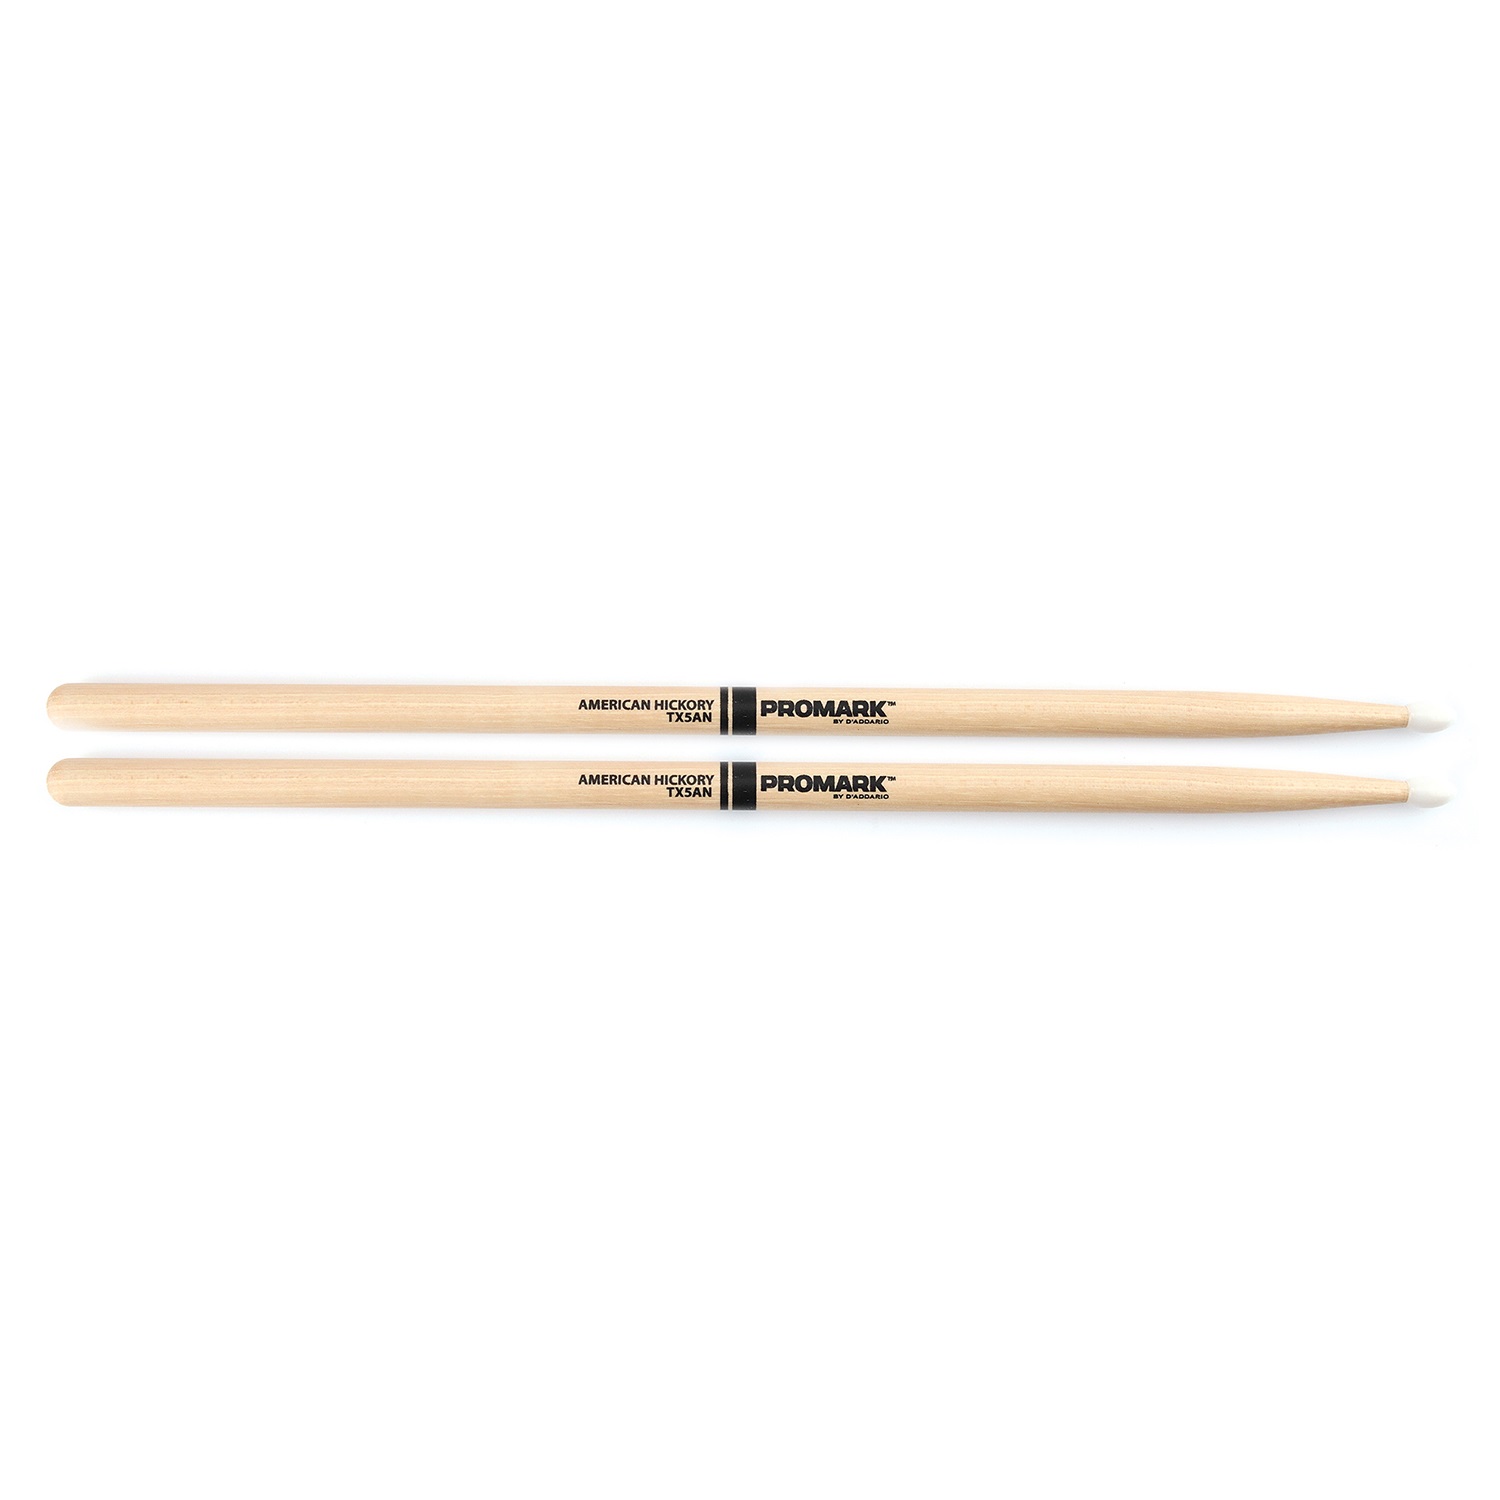 An image of Promark Hickory 5A Nylon Tip Drumstick Pair